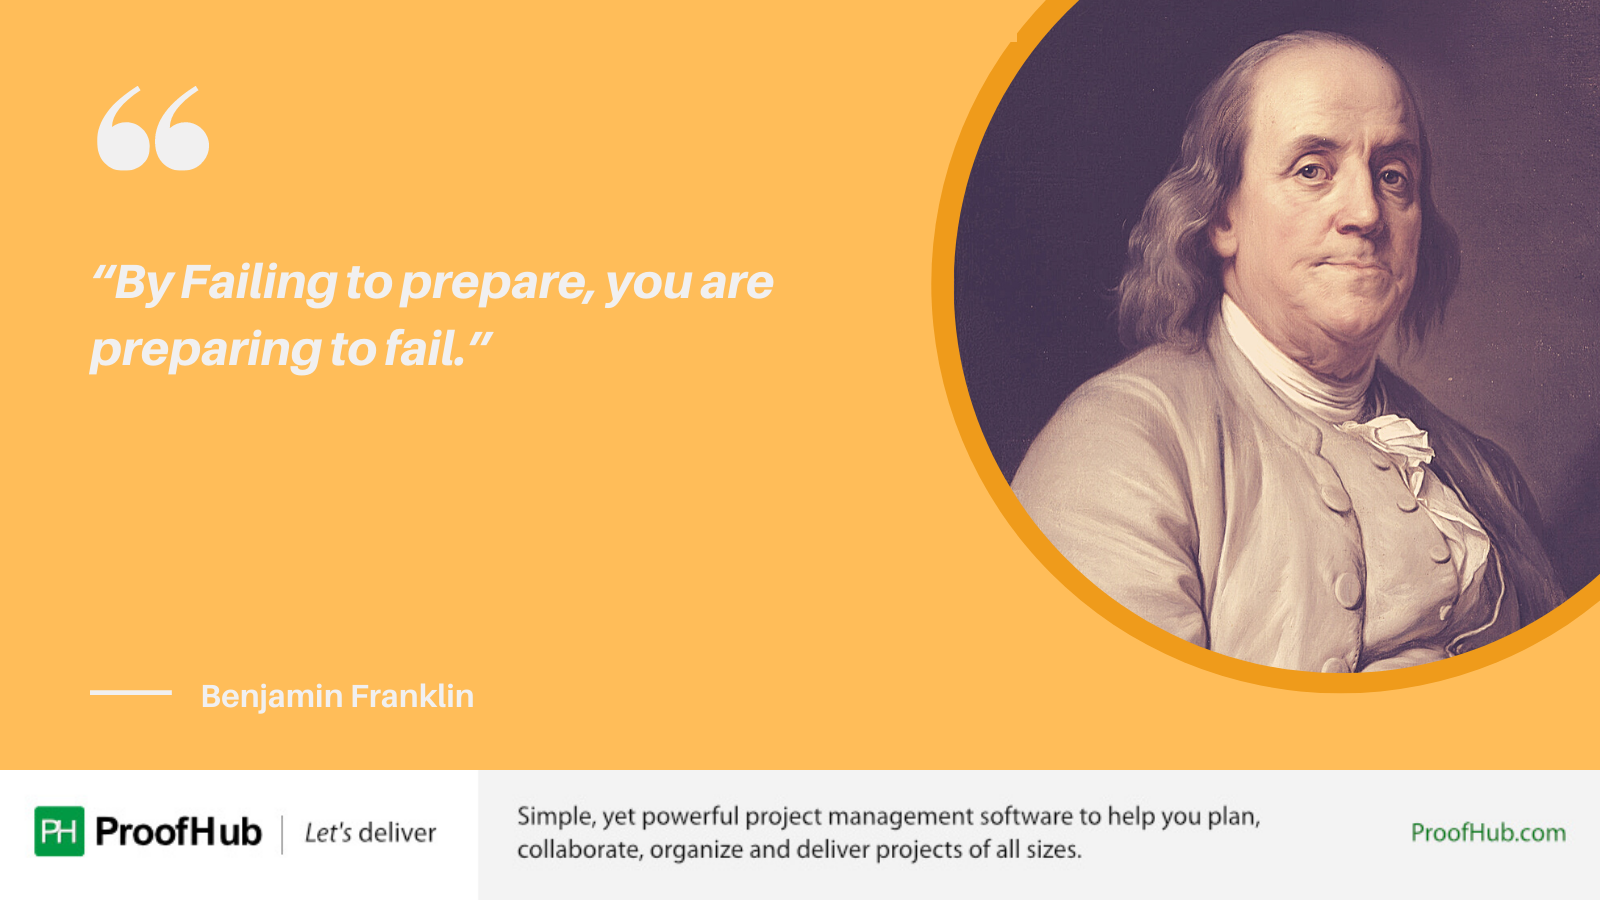 By Failing to prepare, you are preparing to fail quote by Benjamin Franklin